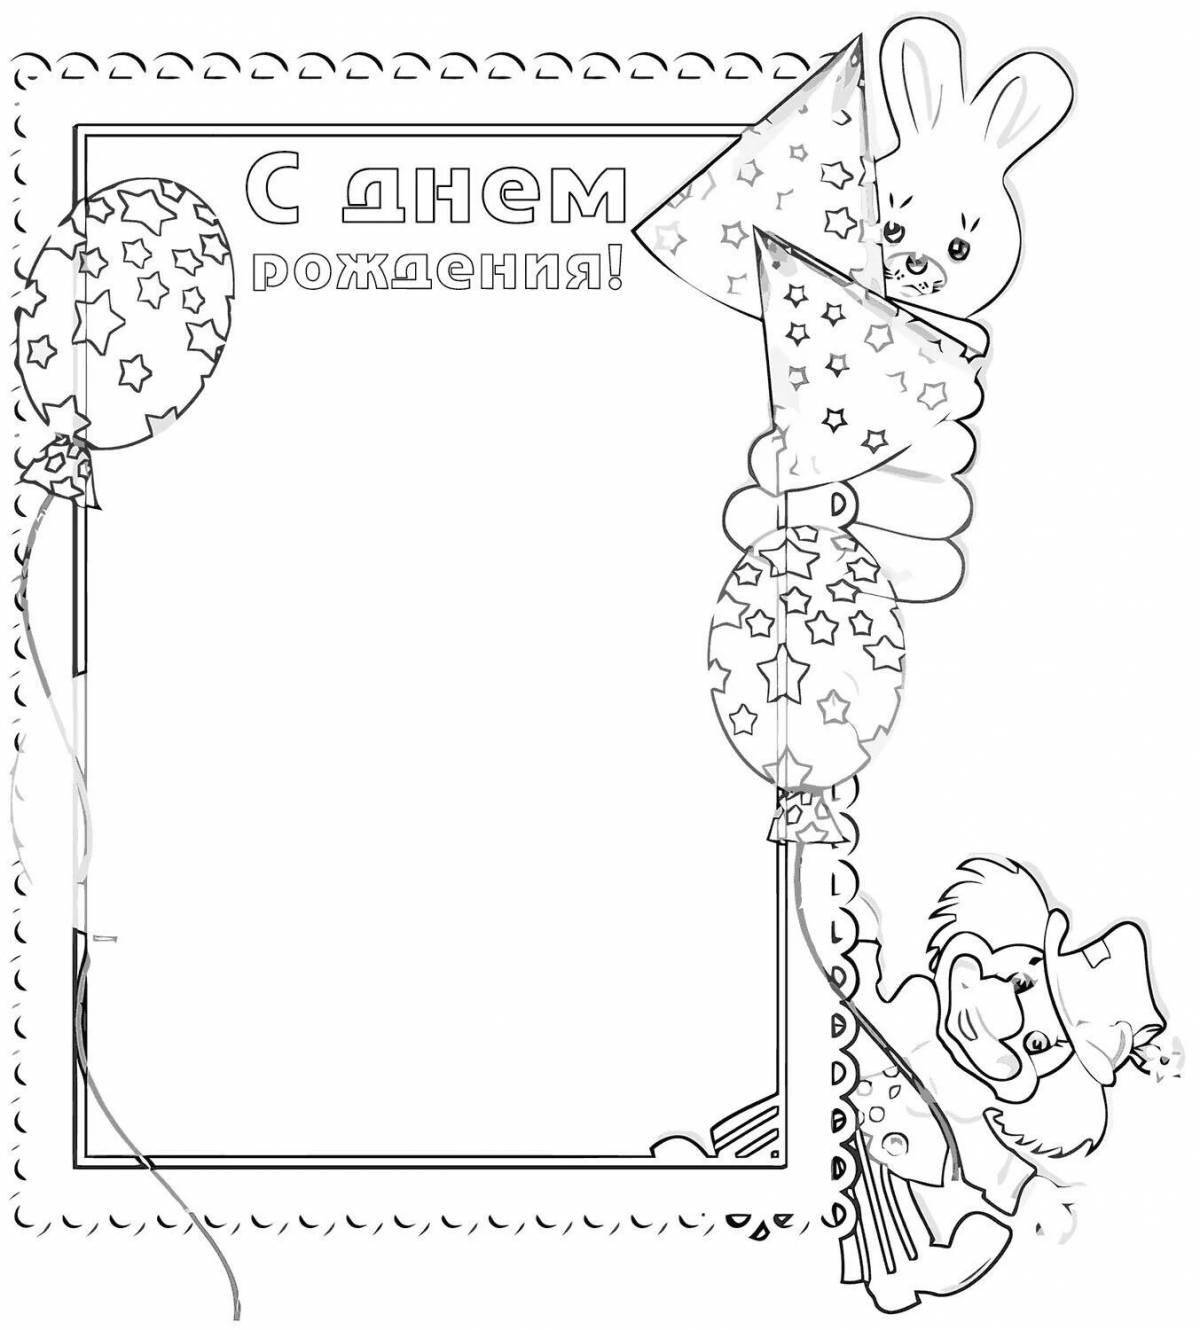 Bright coloring card for the little ones